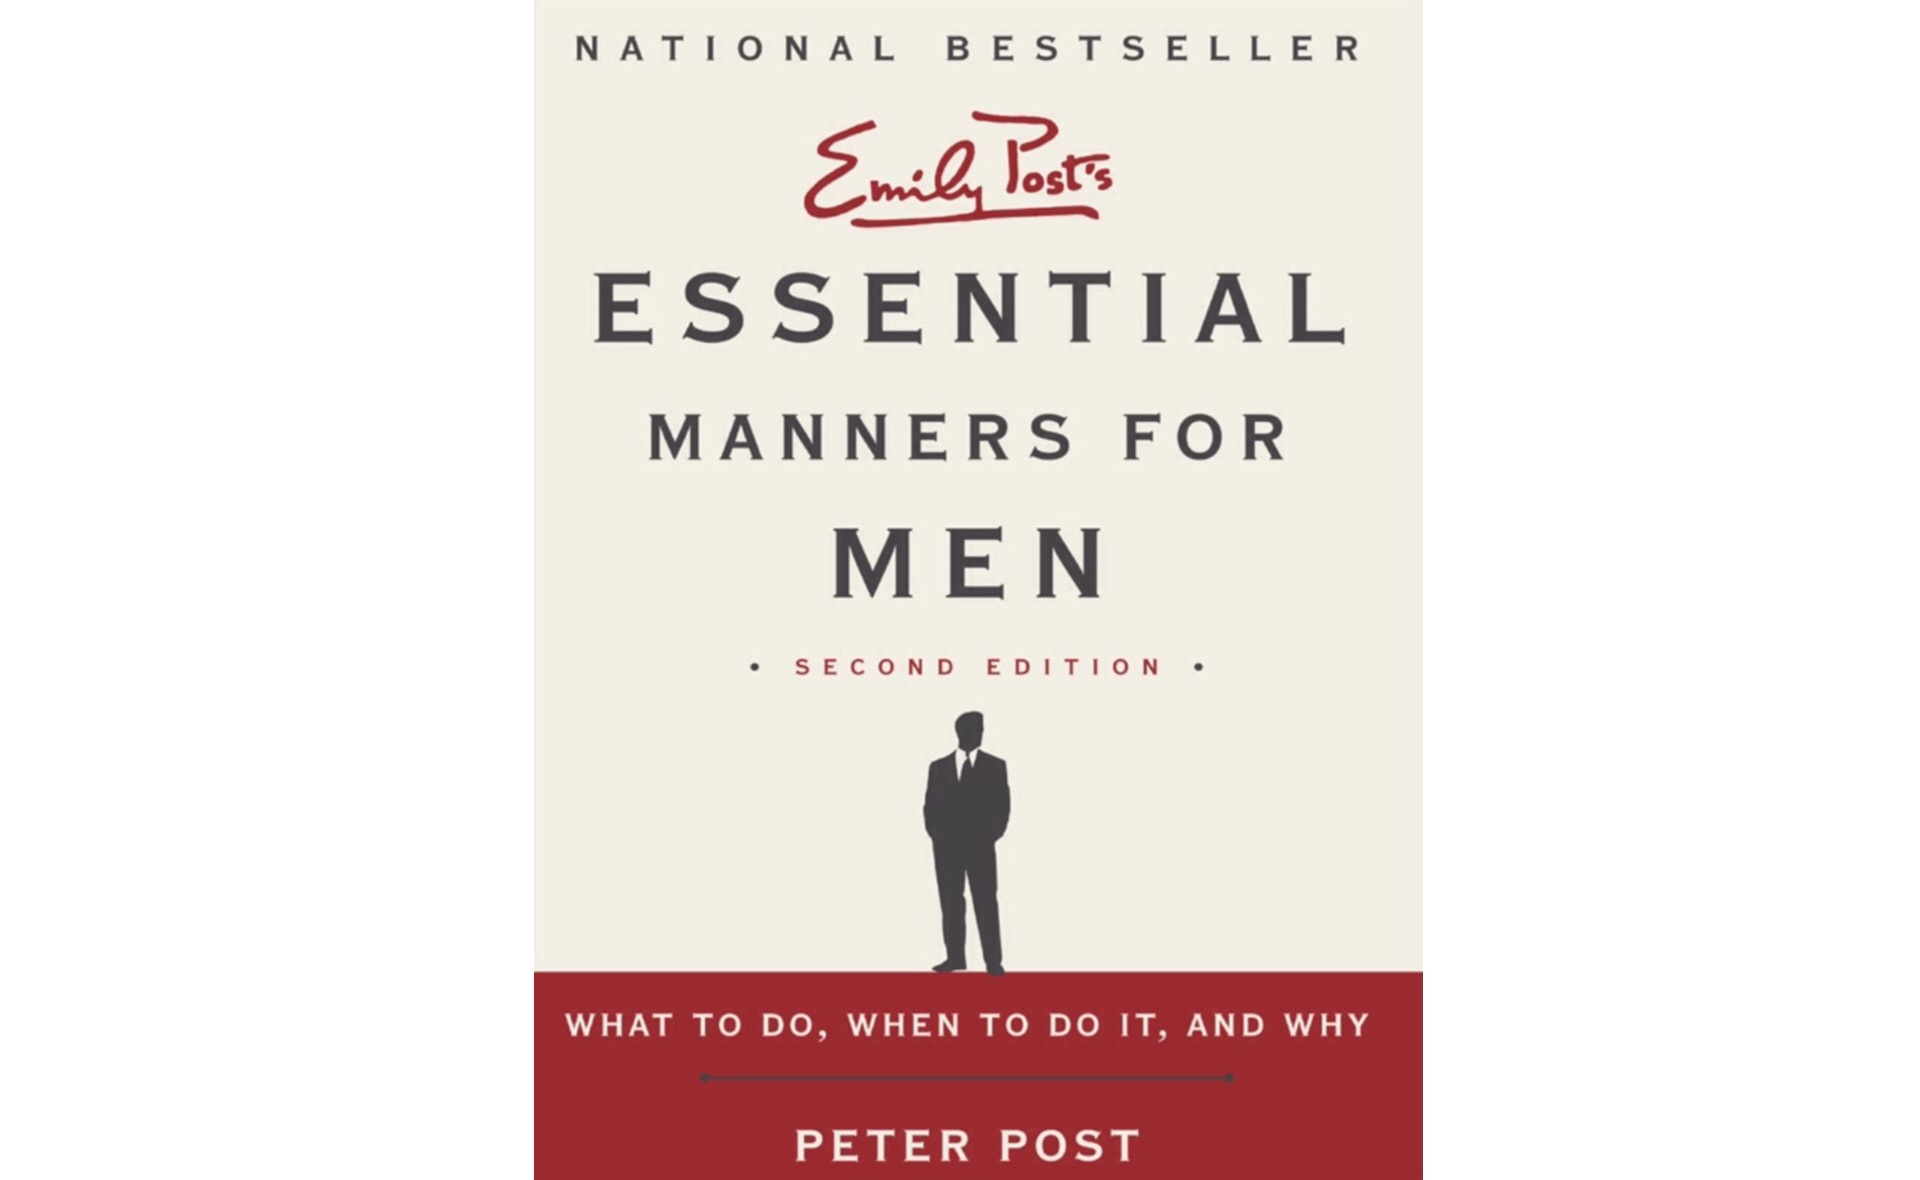 Essential Manners for Men by Peter Post.